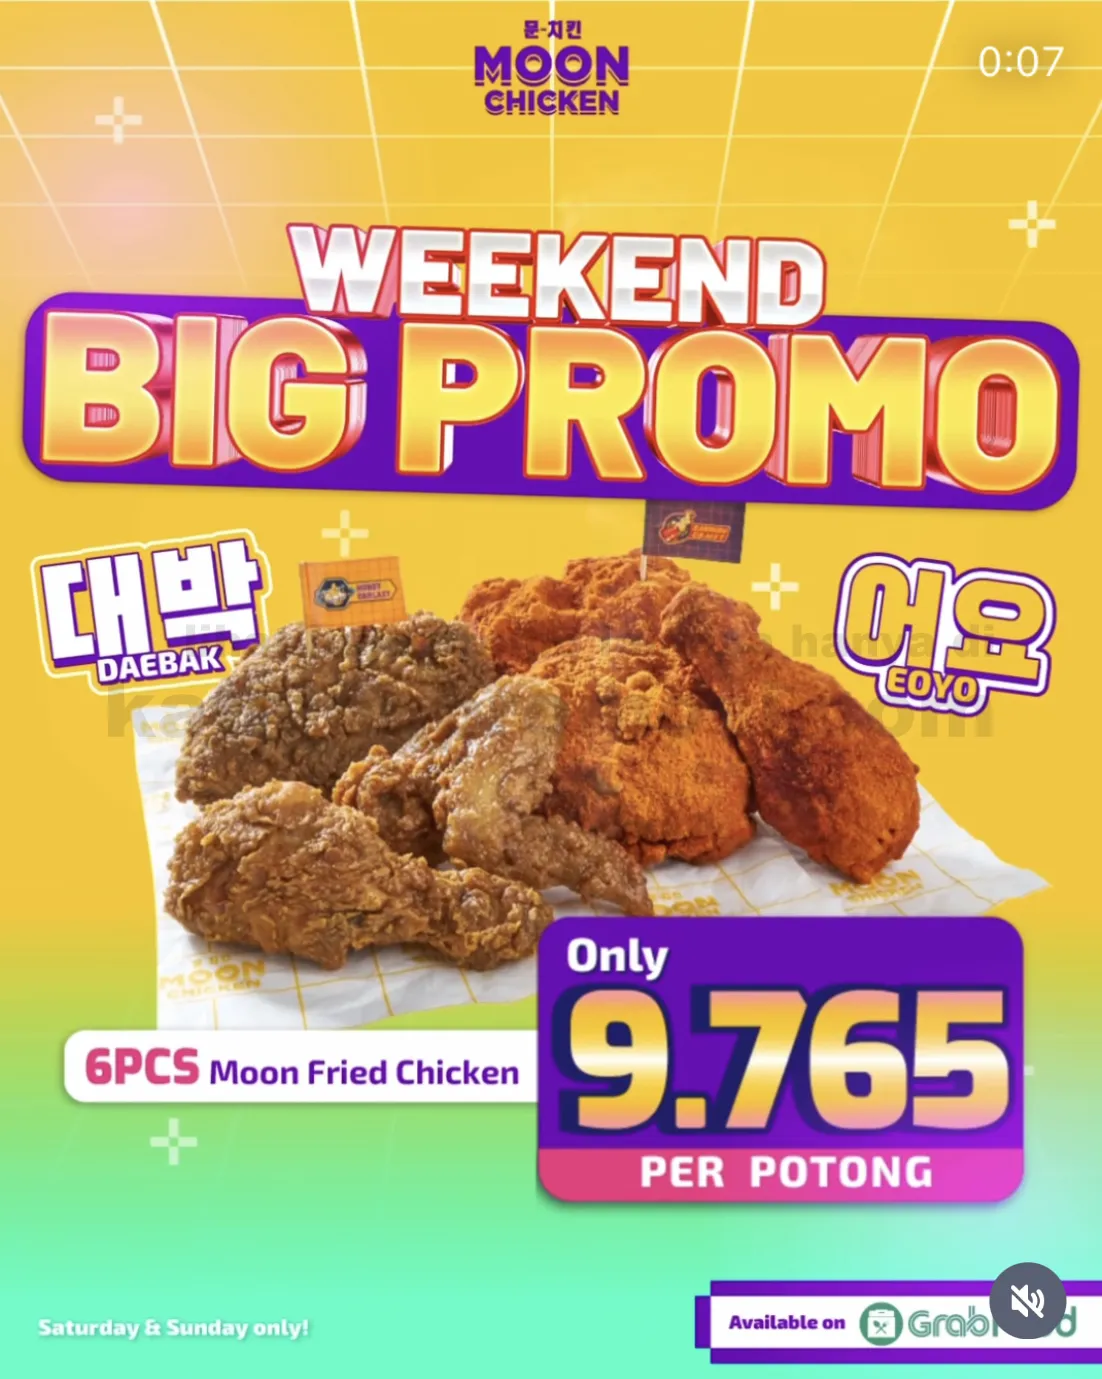 Promo MOON CHICKEN GRABFOOD WEEKEND SPECIAL - 6 Pcs Moon Fried Chicken cuma Rp. 9,765/potong 